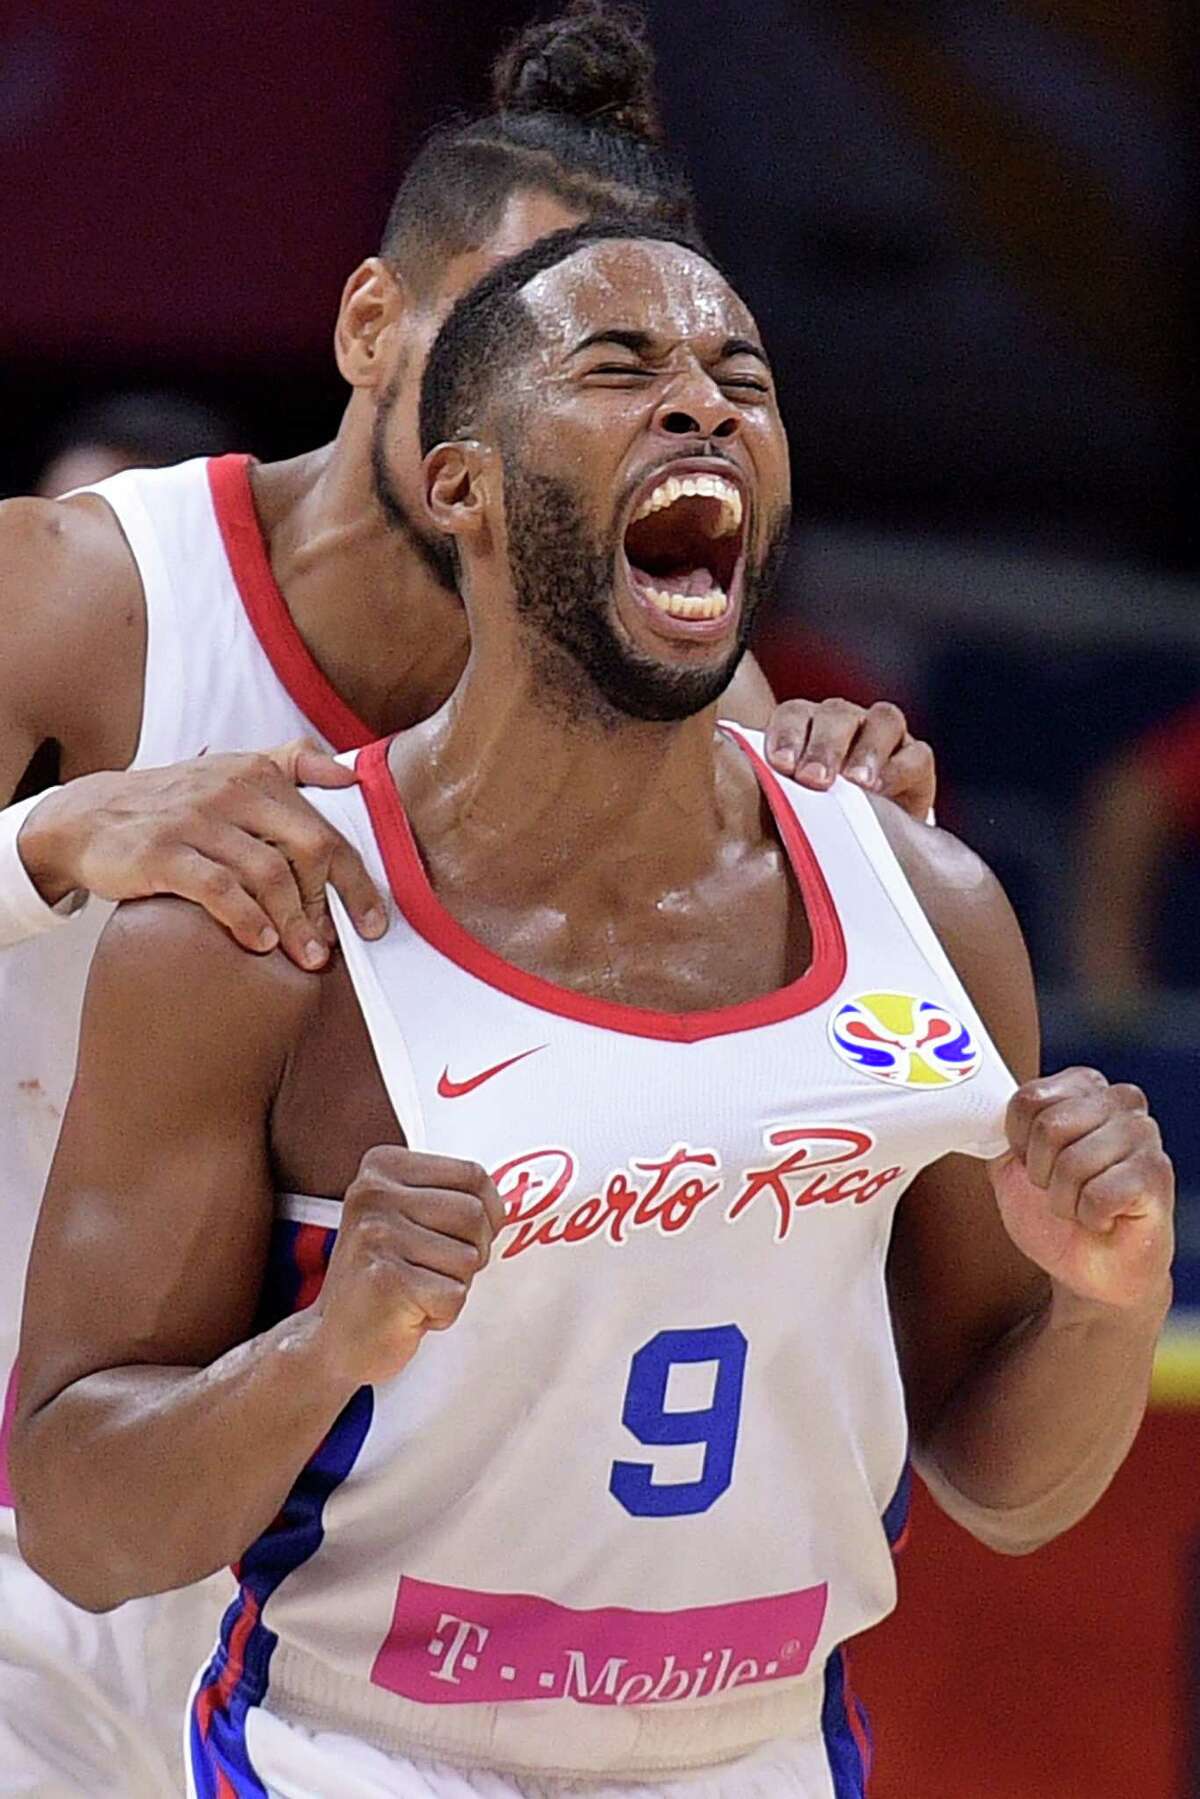 Puerto Rico's Gary Browne celebrates after his team's win against Tunisia at the Basketball World Cup Group C game in Guangzhou on September 4, 2019. (Photo by Nicolas ASFOURI / AFP)NICOLAS ASFOURI/AFP/Getty Images